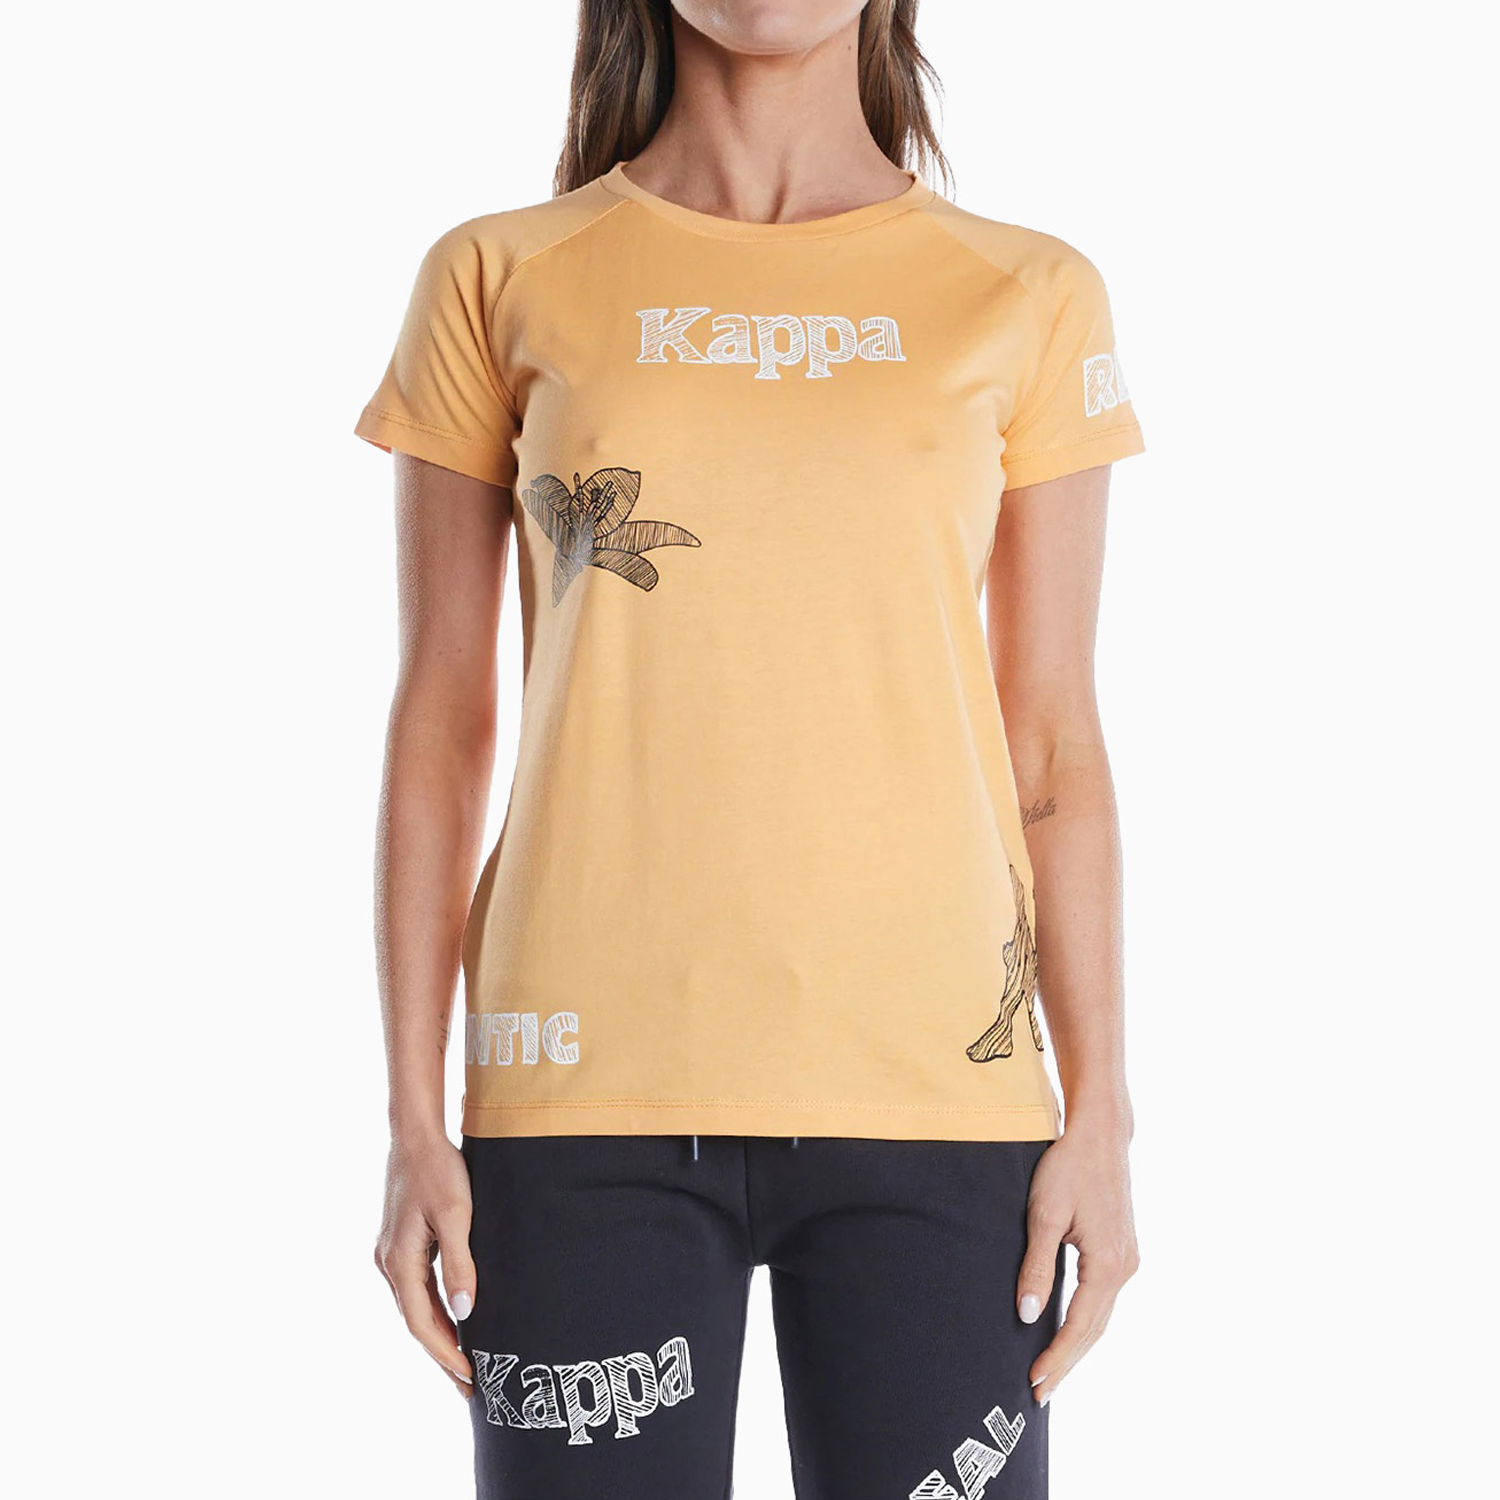 kappa-womens-authentic-graphik-tibi-outfit-371f16w-a06-351b2bw-a06